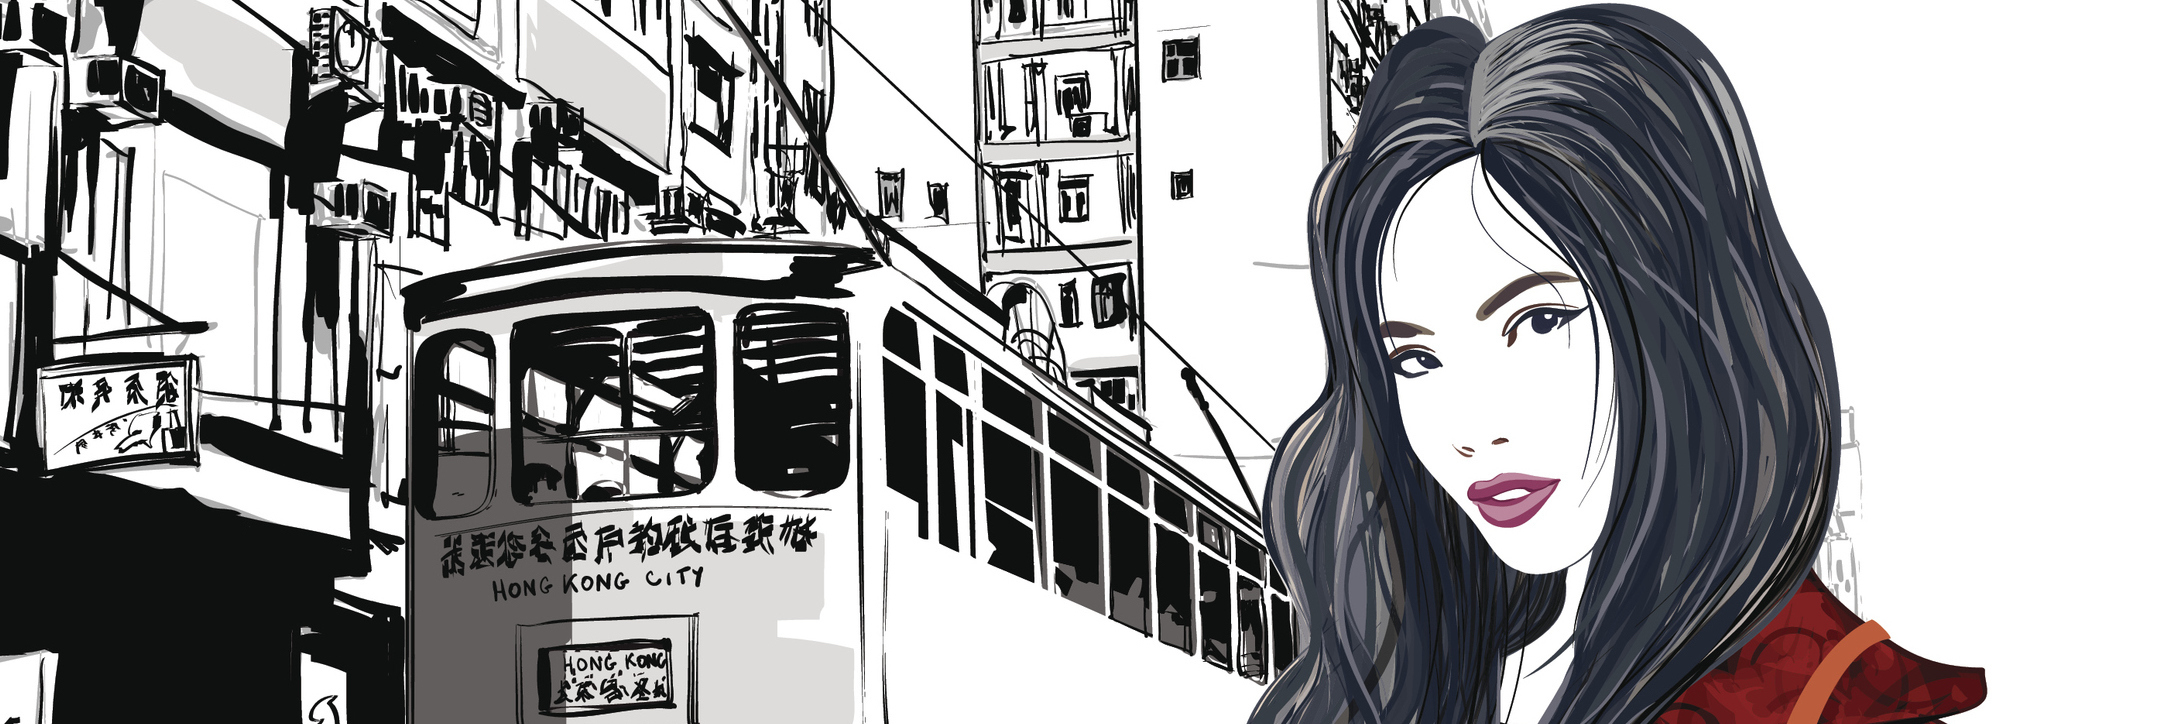 Street in Hong Kong - Vector illustration (all chinese characters are fictitious)